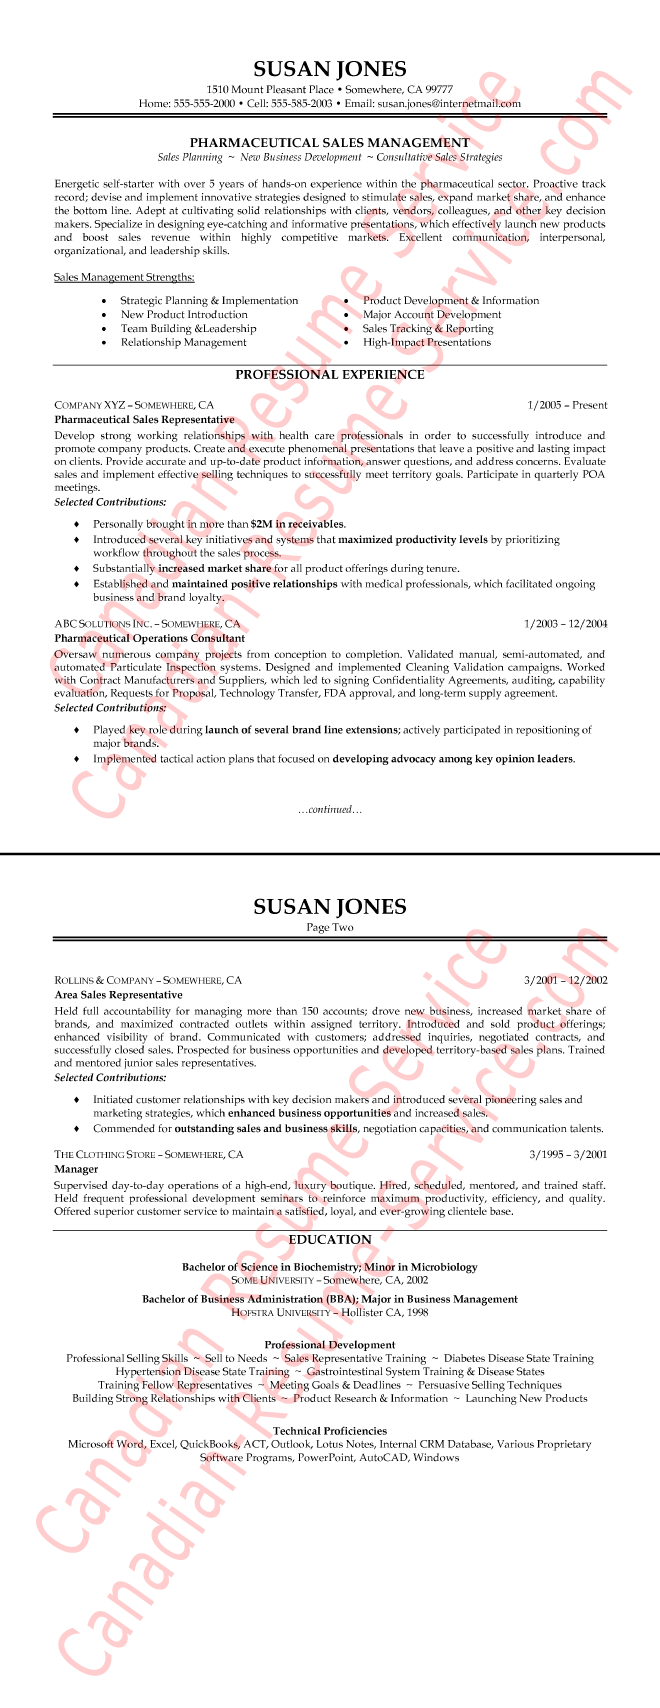 Pharmaceutical Sales Manager Resume.